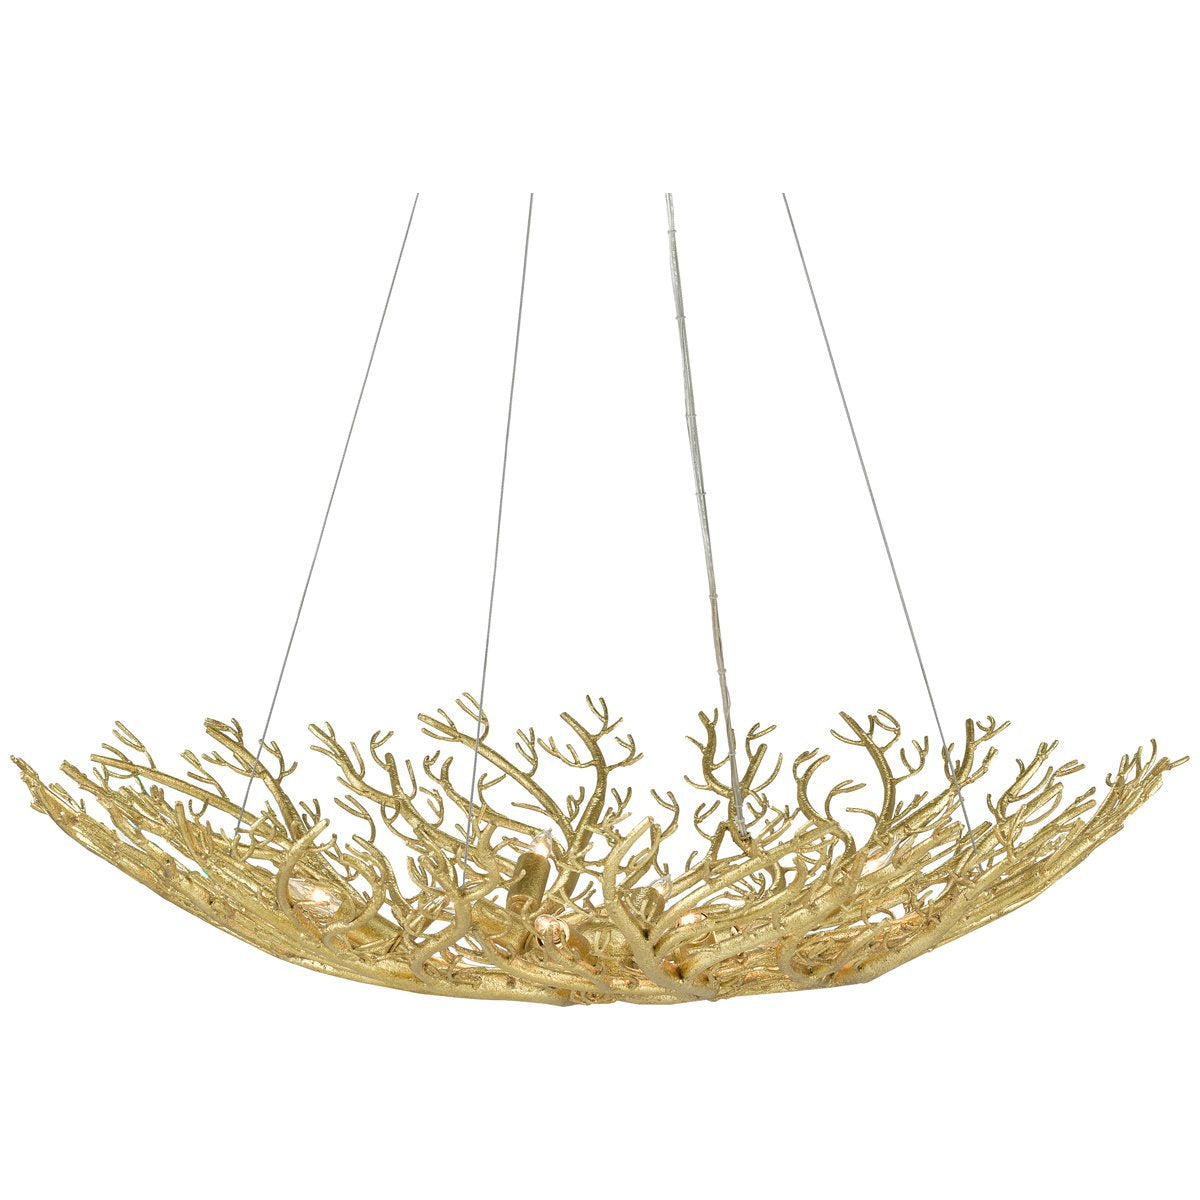 Currey and Company Sea Fan Bowl Chandelier